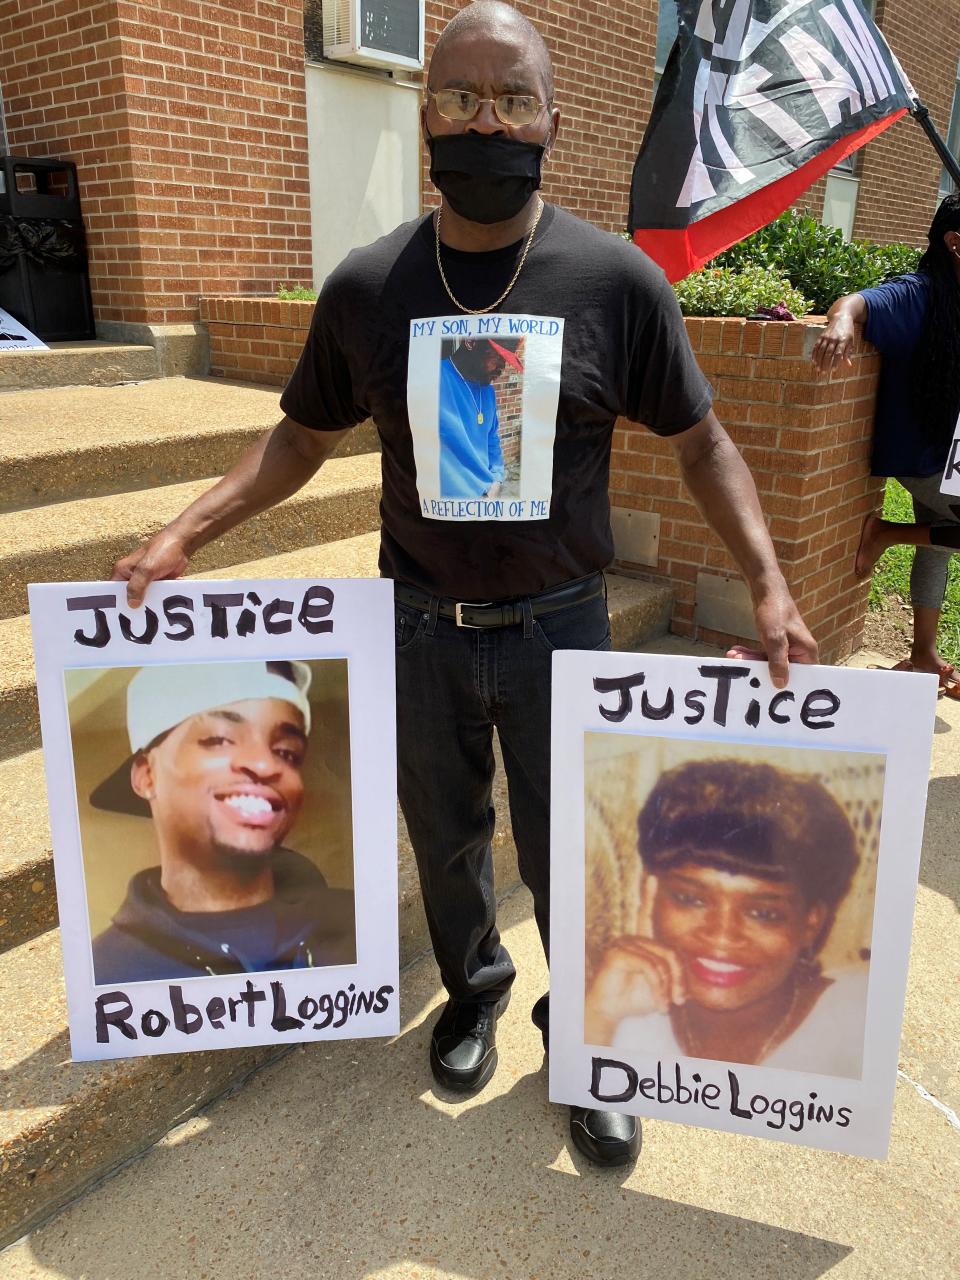 A protest took place outside the Grenada County Jail in Mississippi on Aug. 21, 2021, over the 2018 death of Robert Loggins and the 2005 death of his mother, Debbie Loggins. The Logginses both died after being restrained by officers.